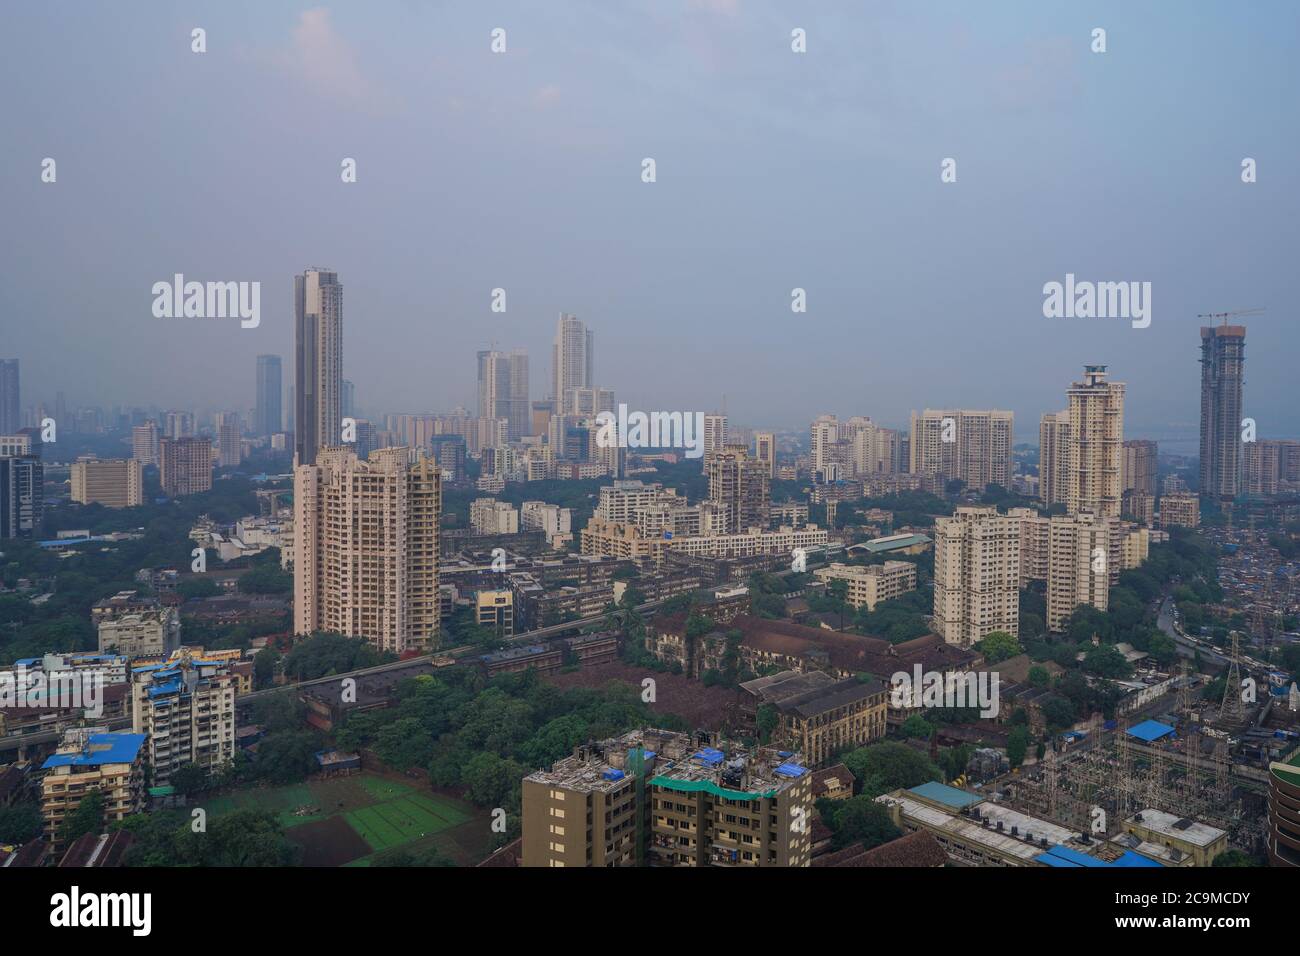 Mumbai Arial View Tall Buildings (Bombay) Monorail Arial Route 2020 Foto Stock